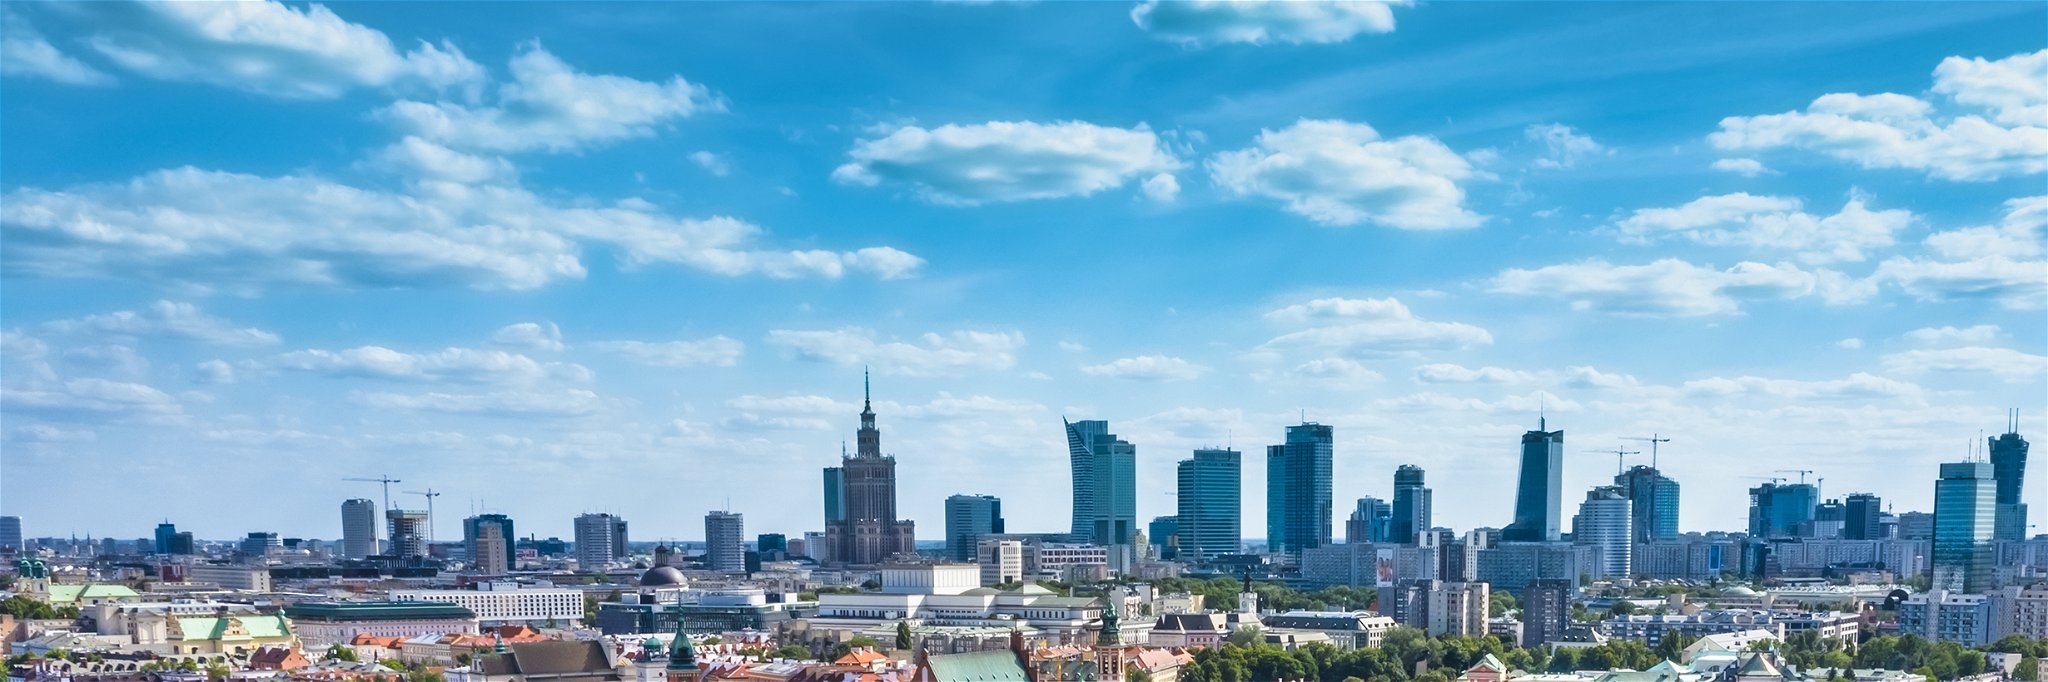 Your perfect weekend in Warsaw